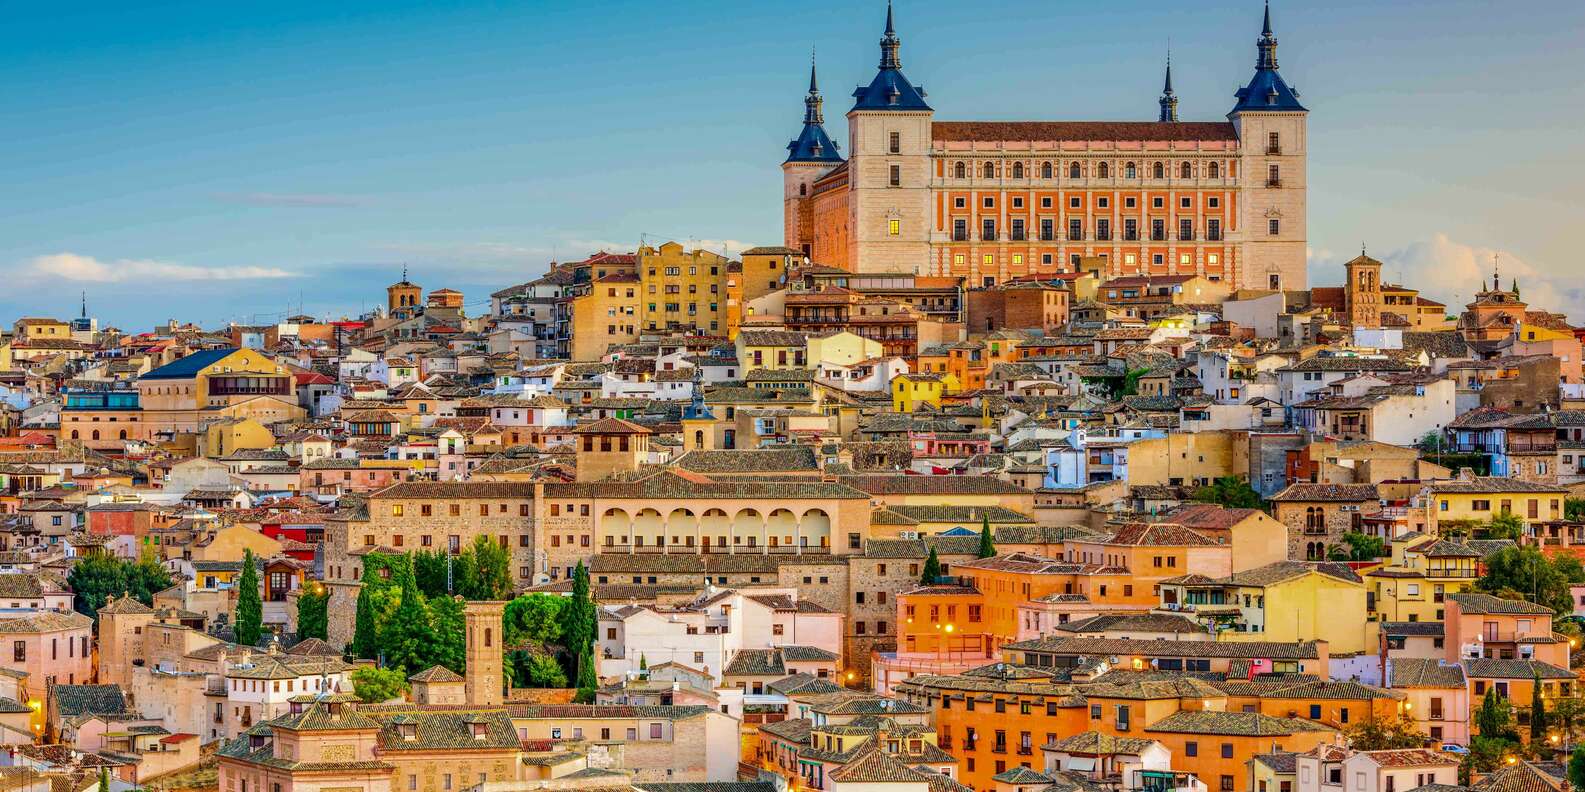 What to do in Toledo